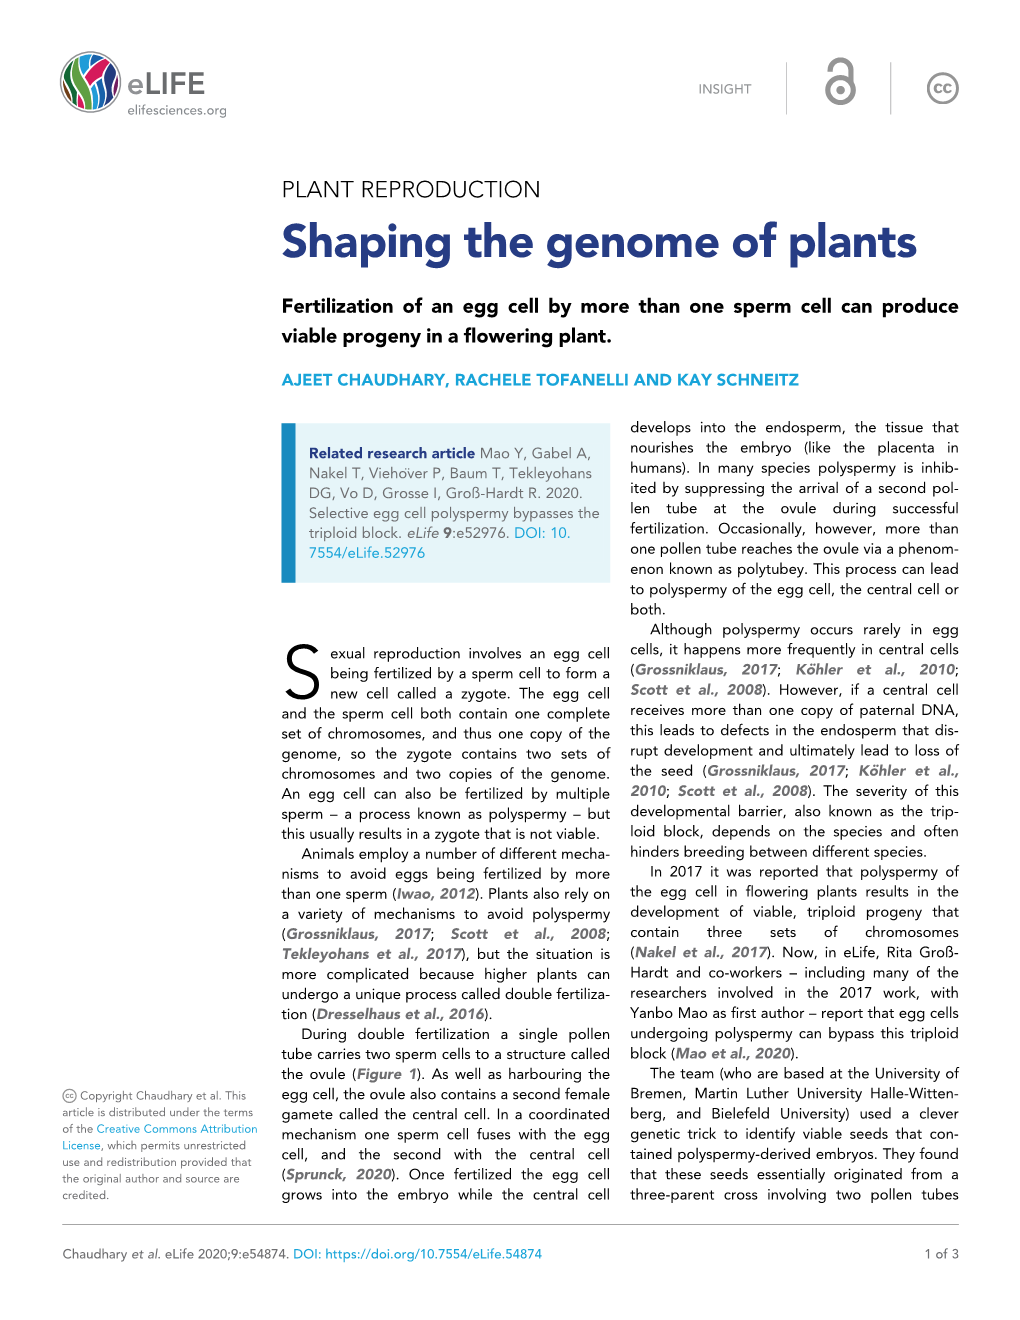 Shaping the Genome of Plants